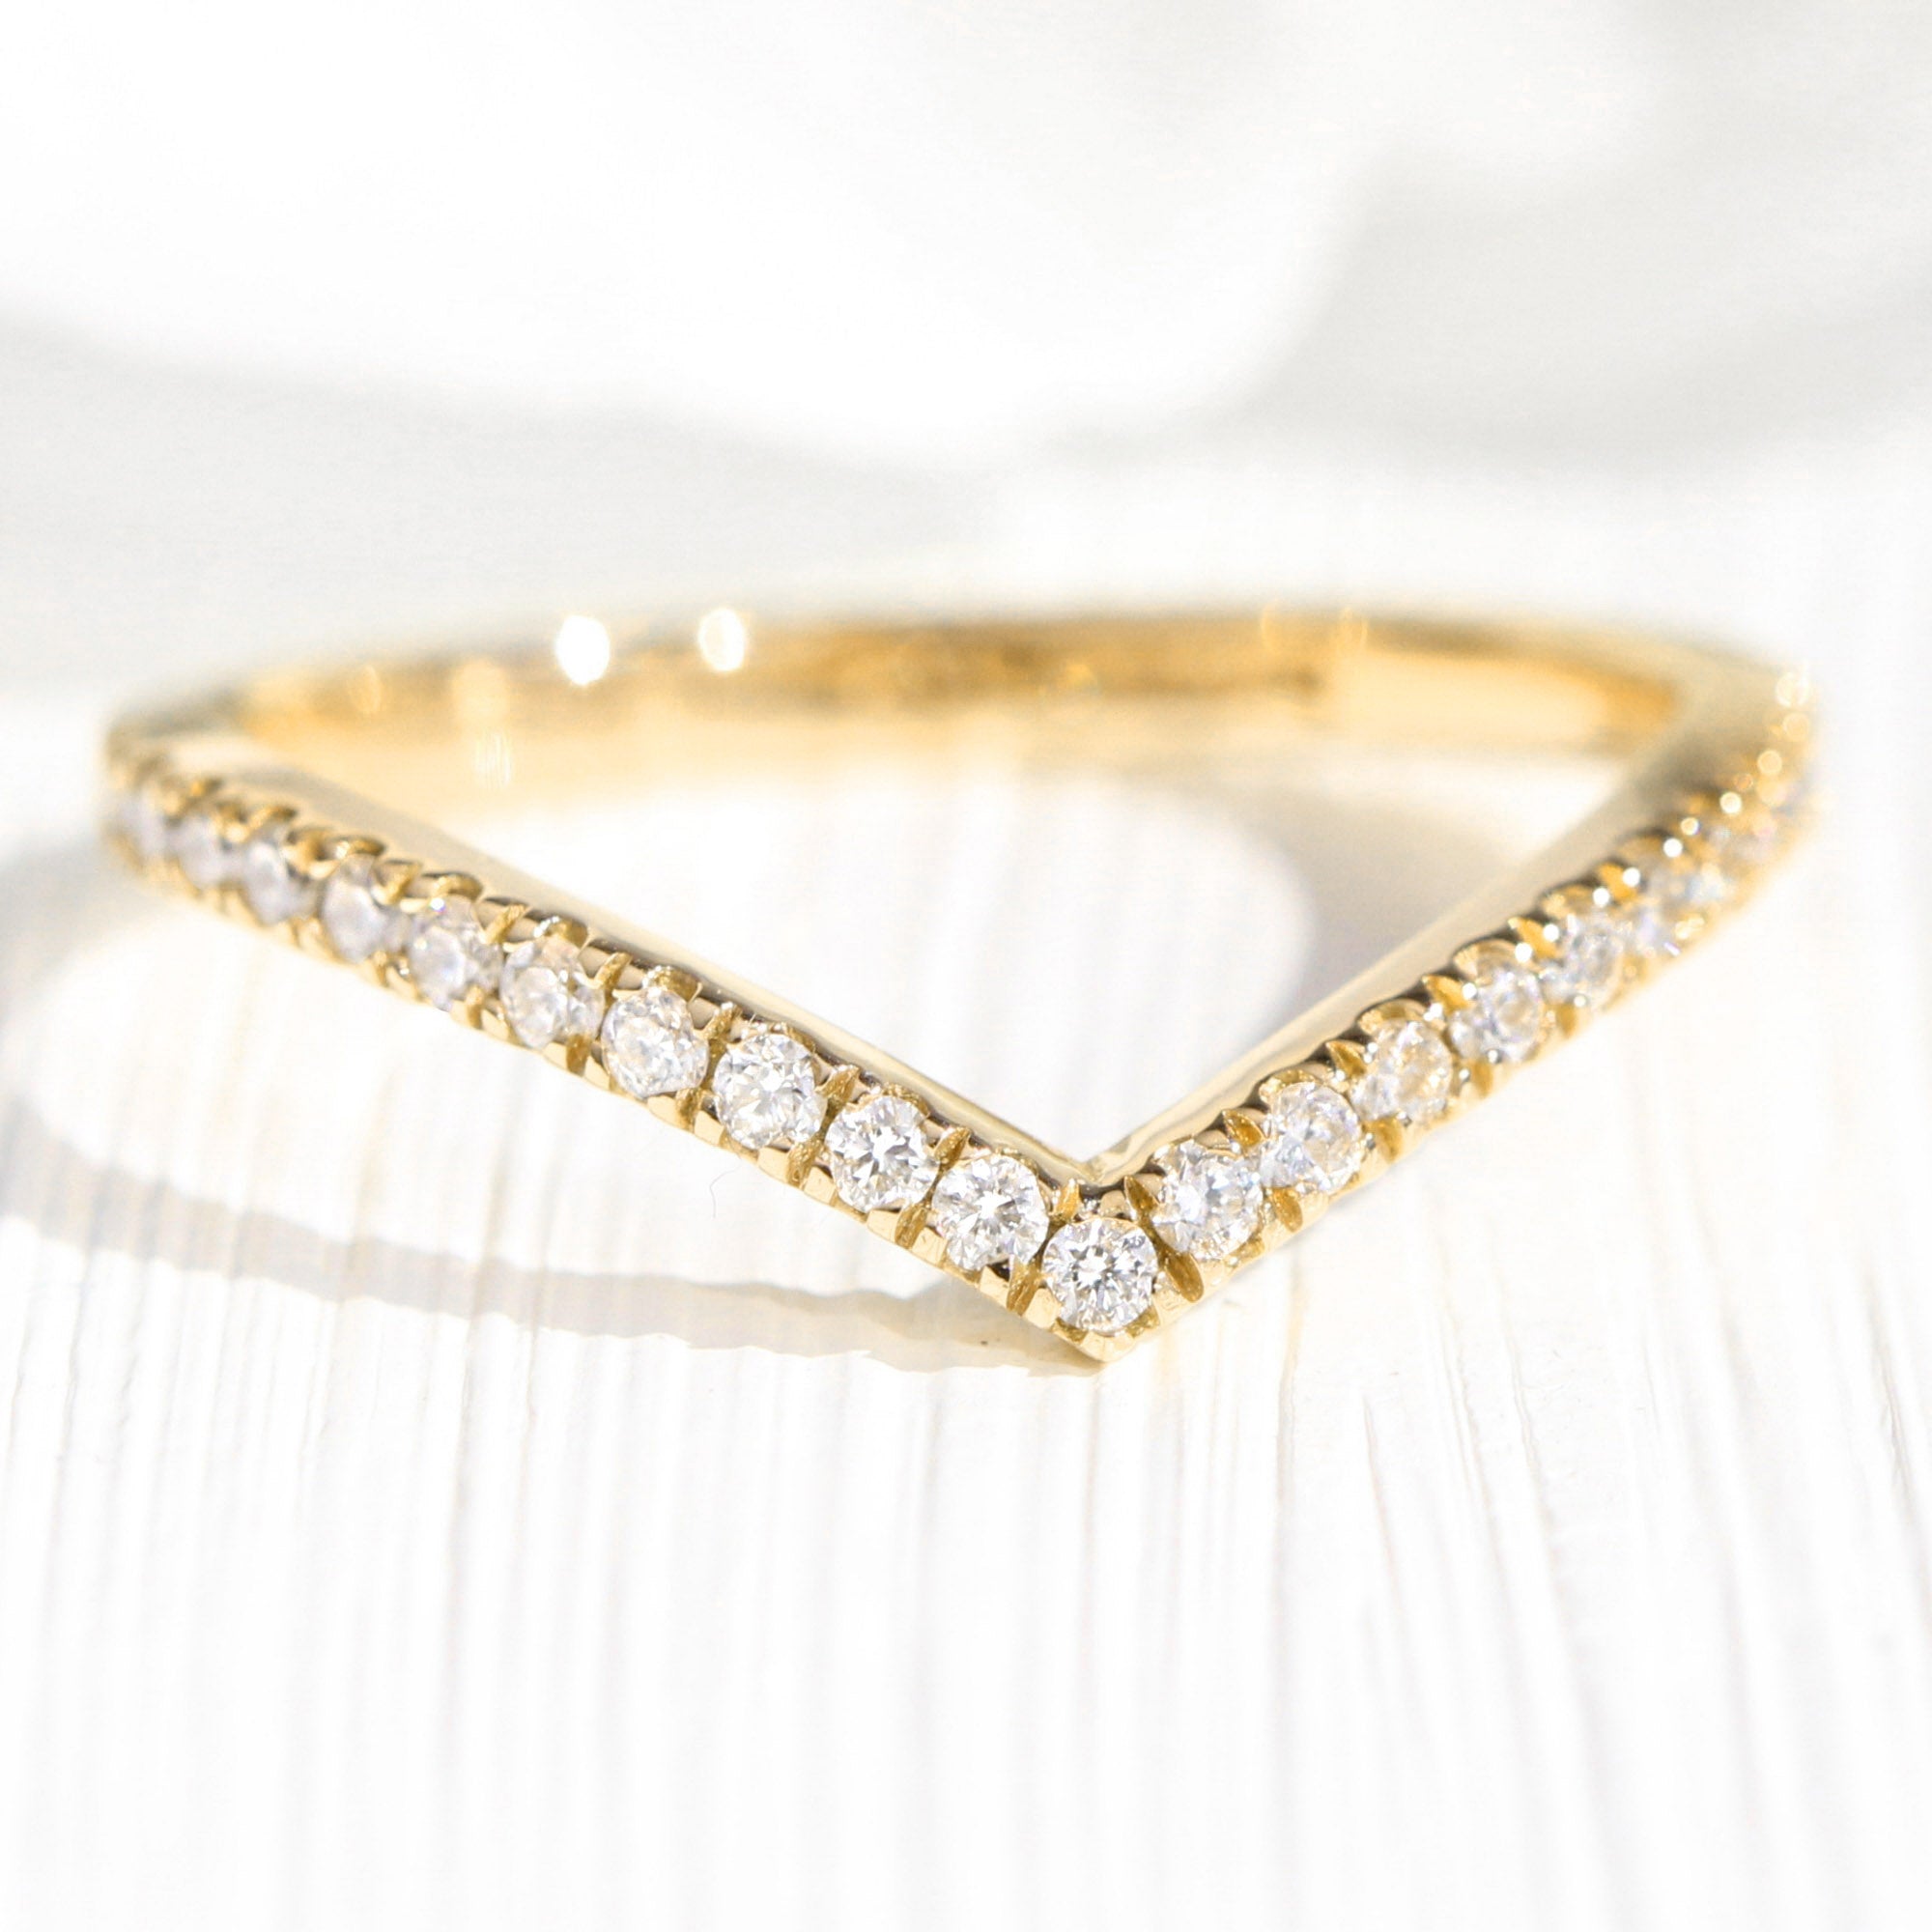 Chevron Diamond Wedding Ring yellow Gold V Shaped Curved Pave Band La More Design Jewelry